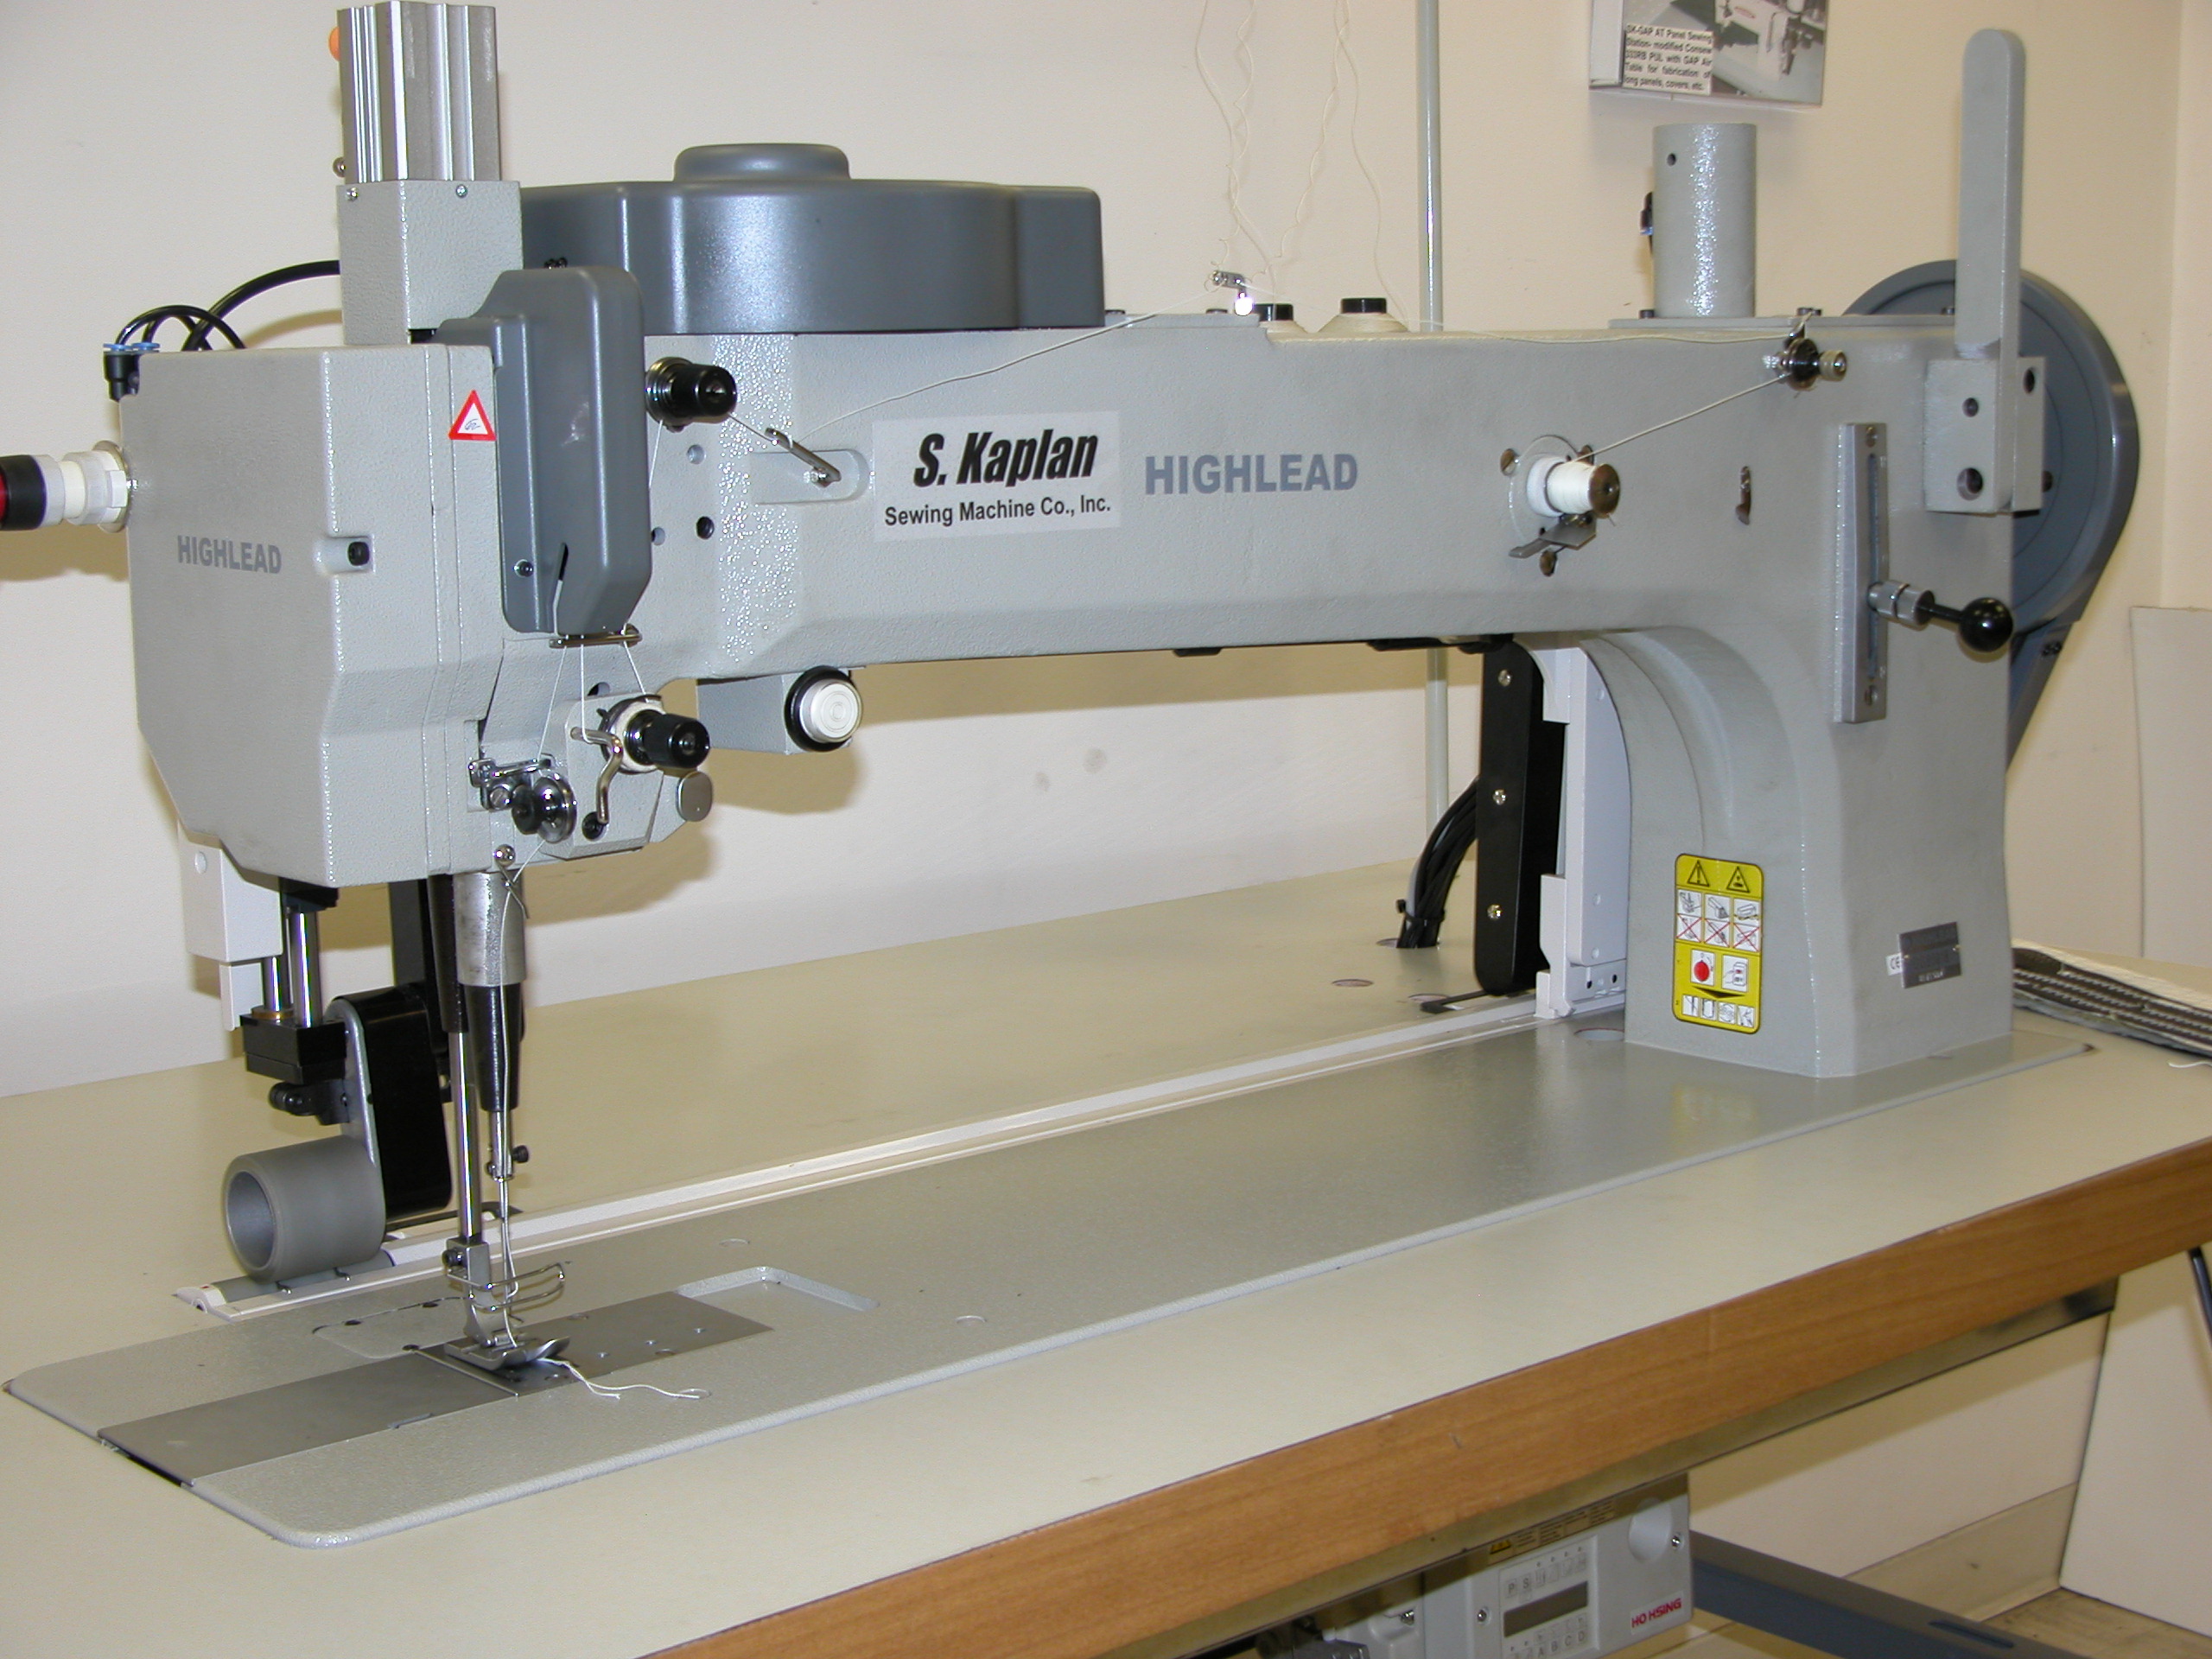 Highlead GG80018 Sewing Machine